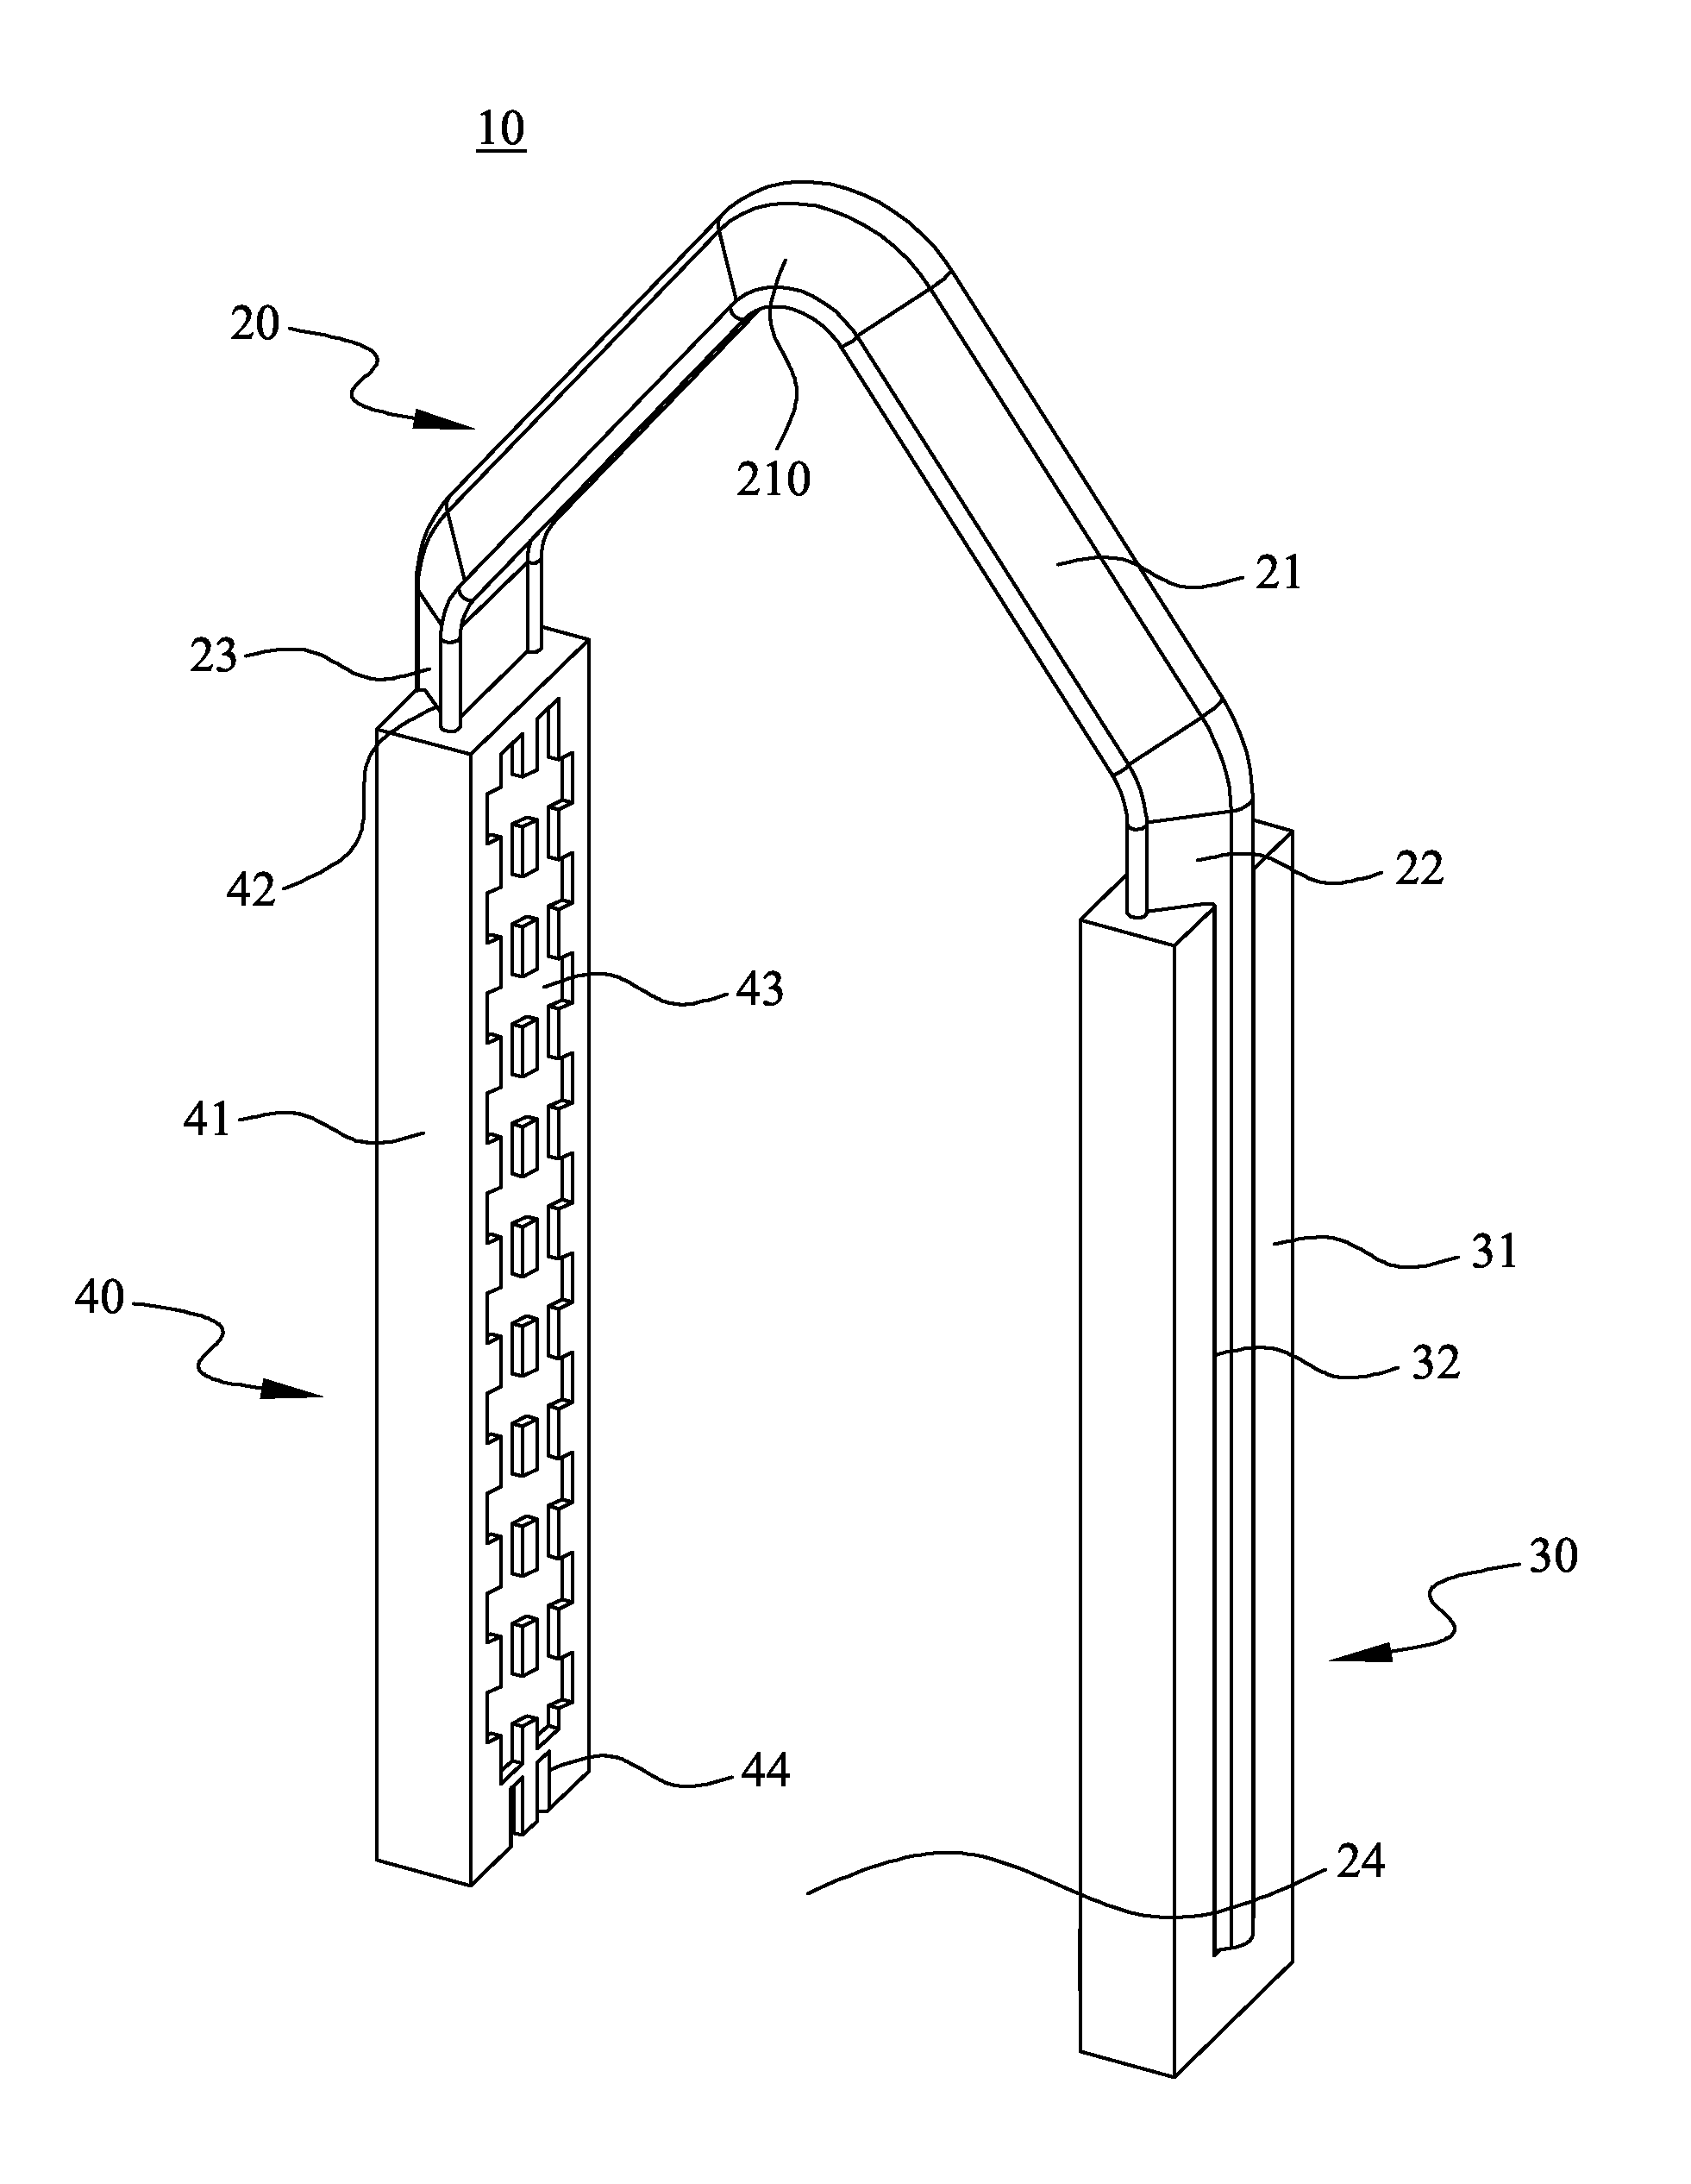 Vascular clamp structure